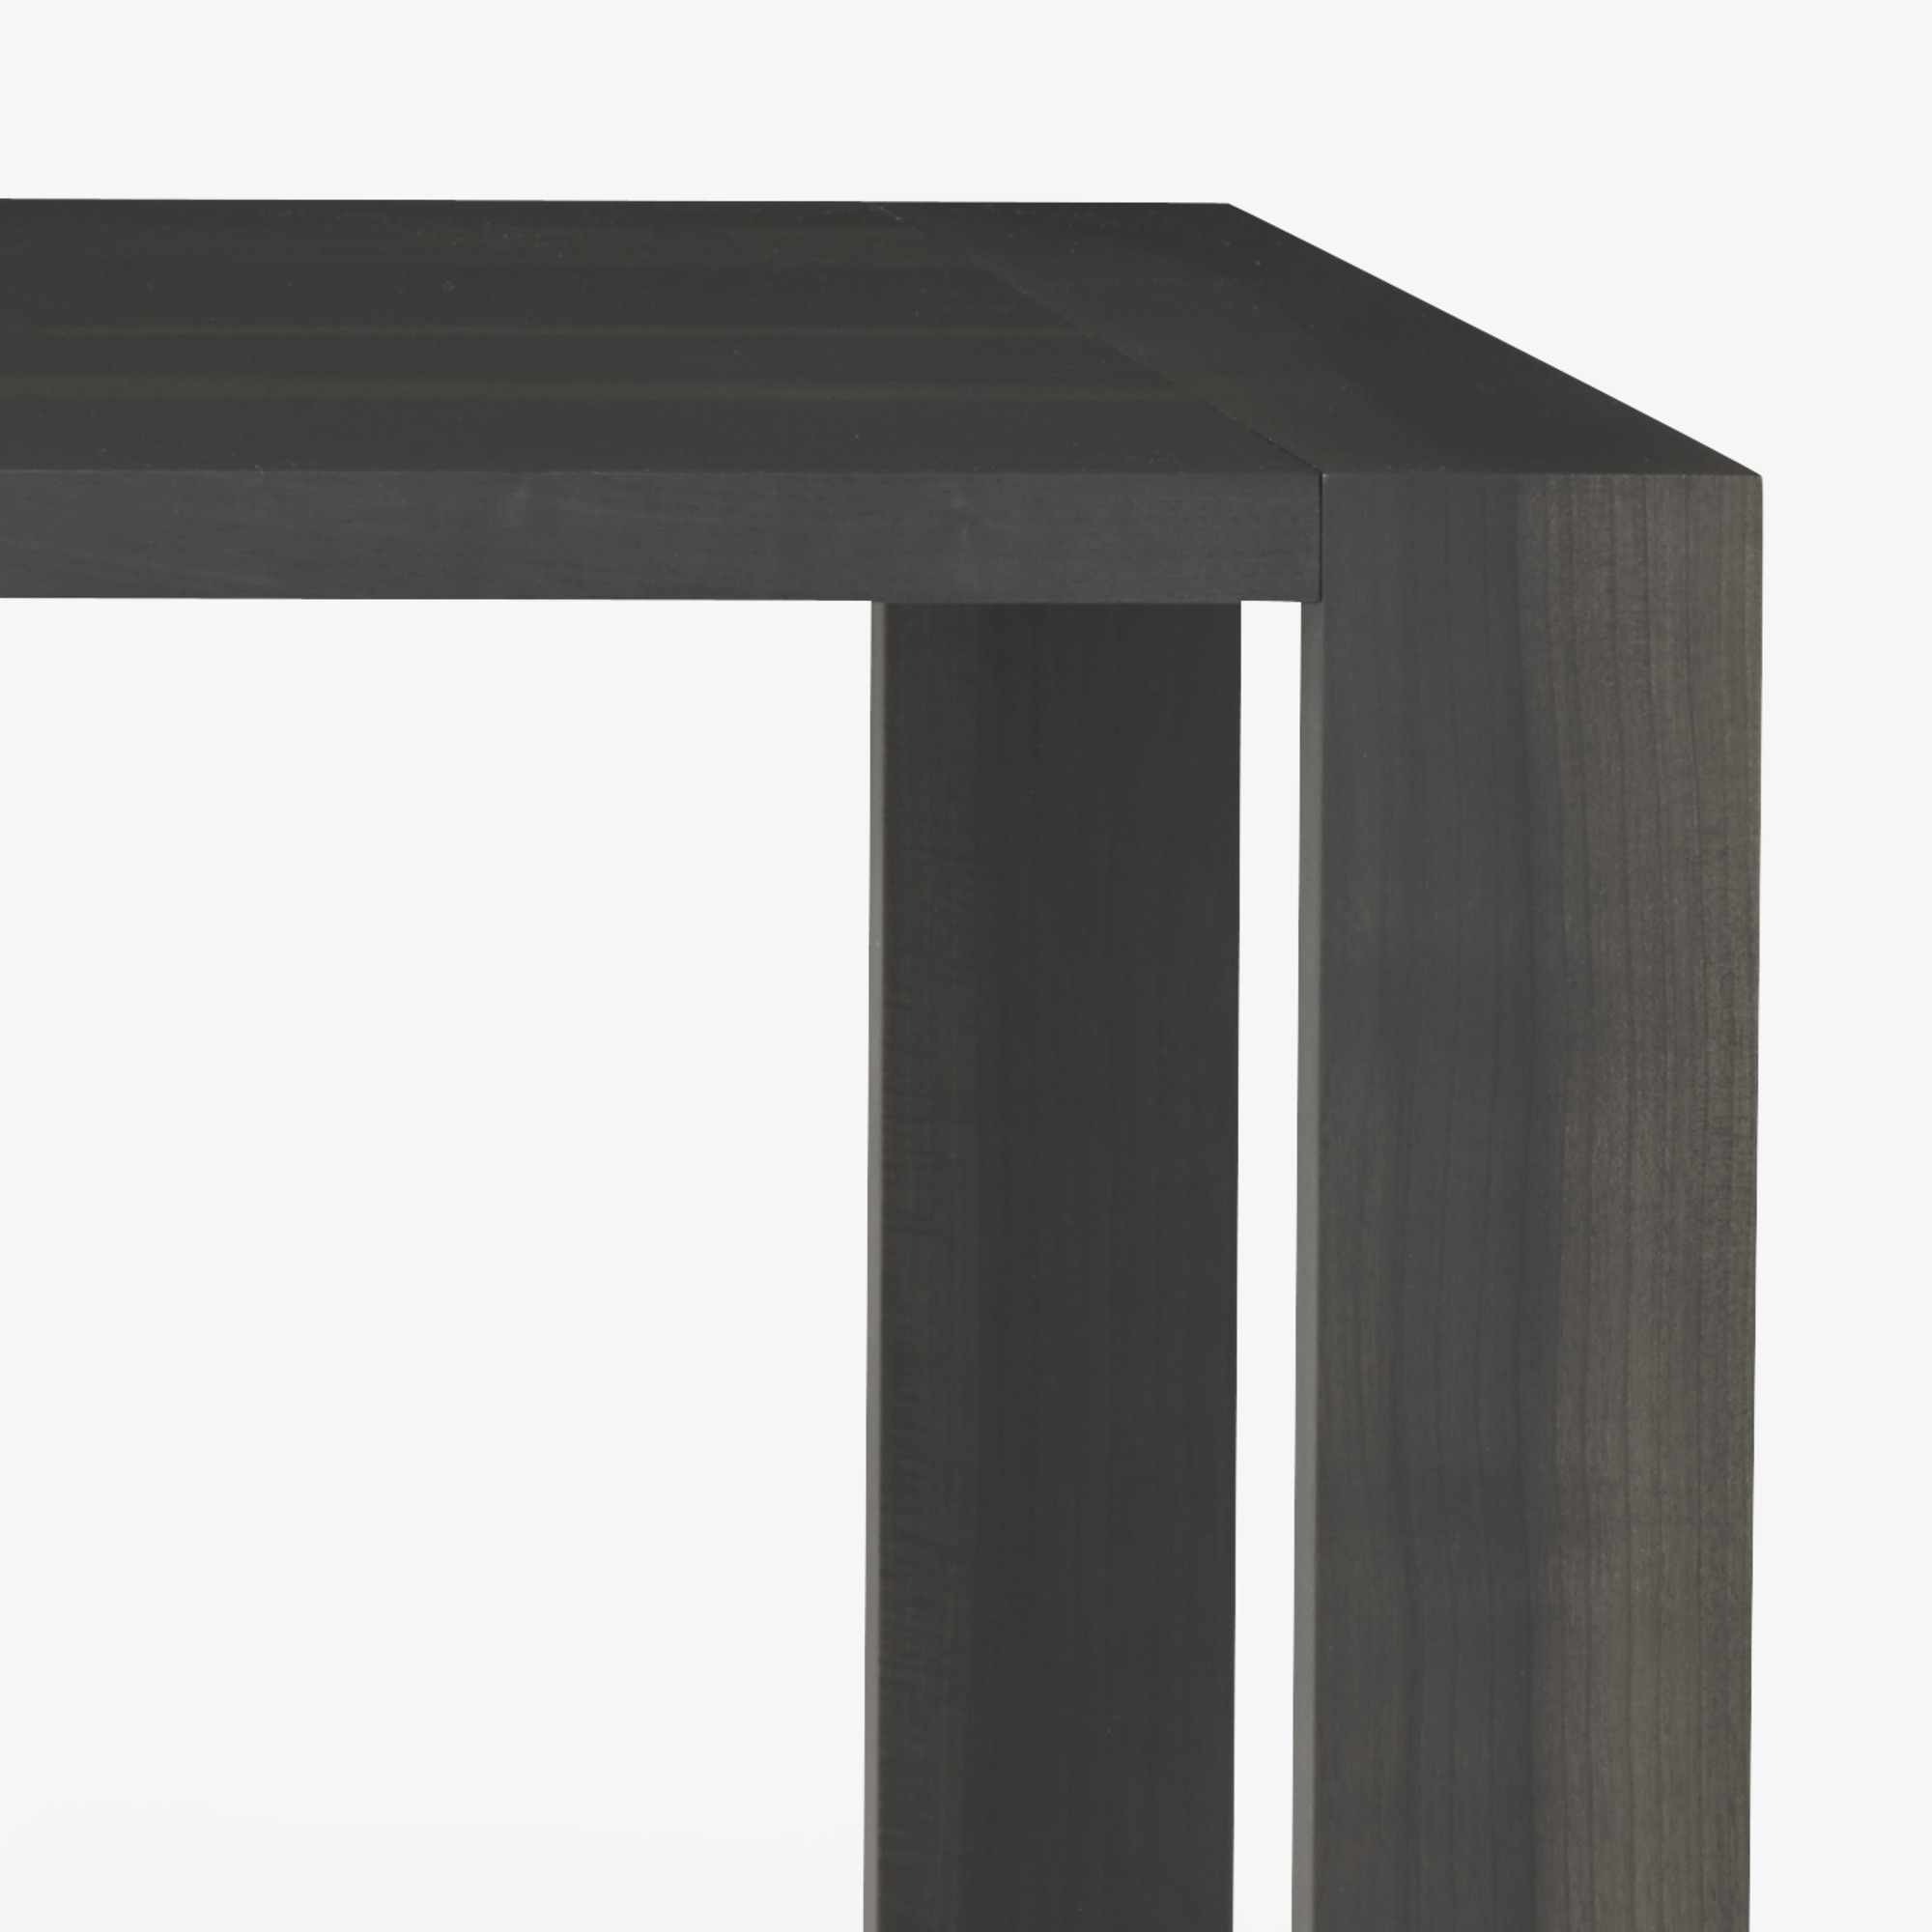 Image Dining table without extension leaf 8